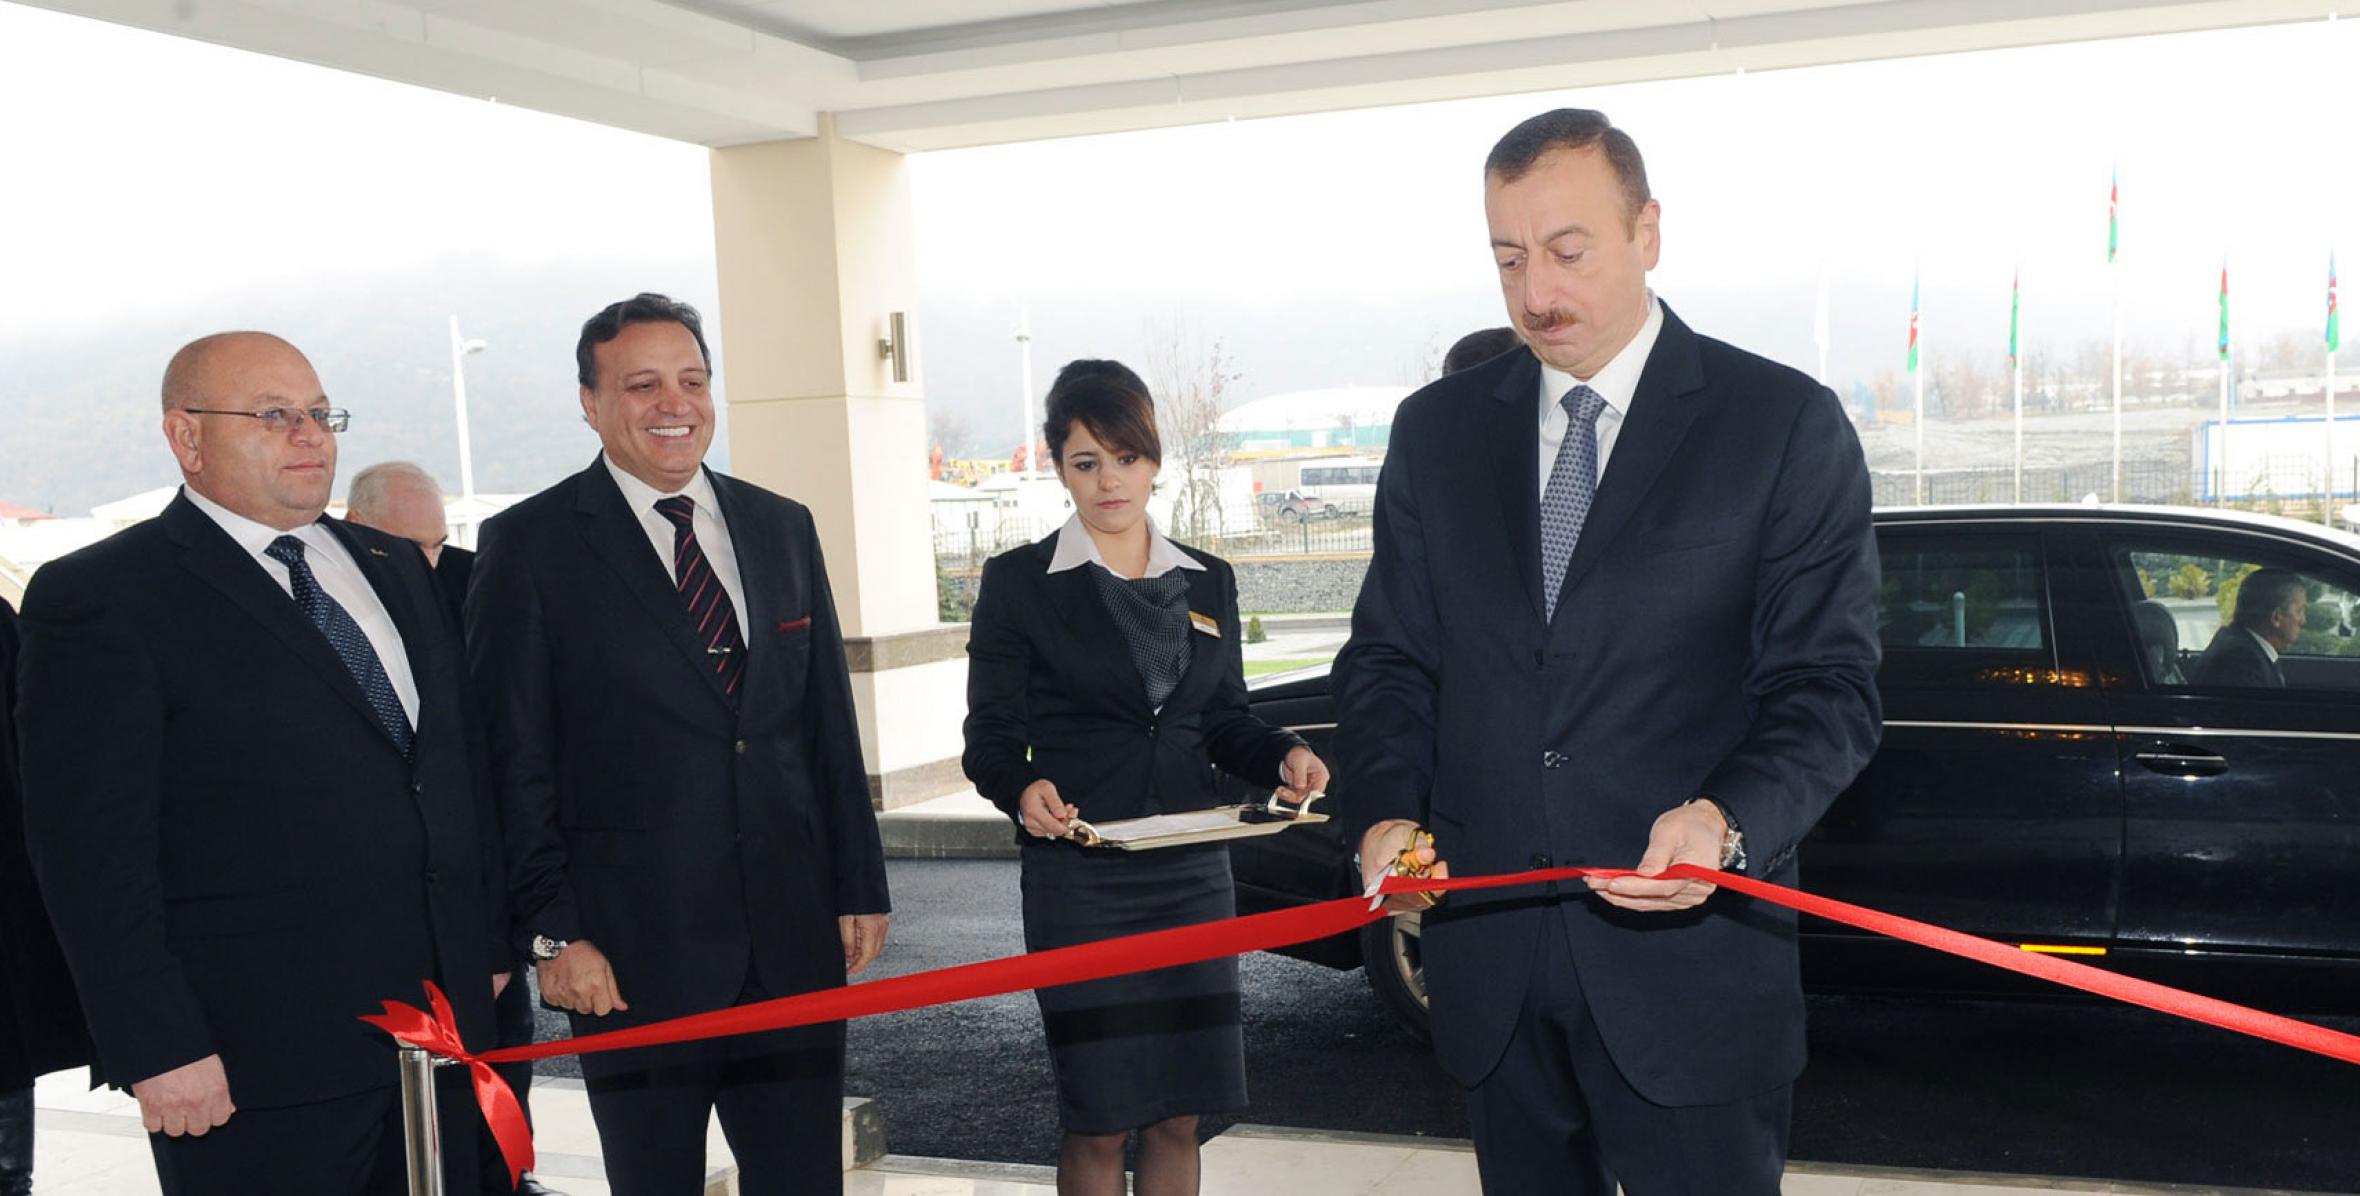 Ilham Aliyev attended the opening of the Qafqaz Sport hotel in Gabala